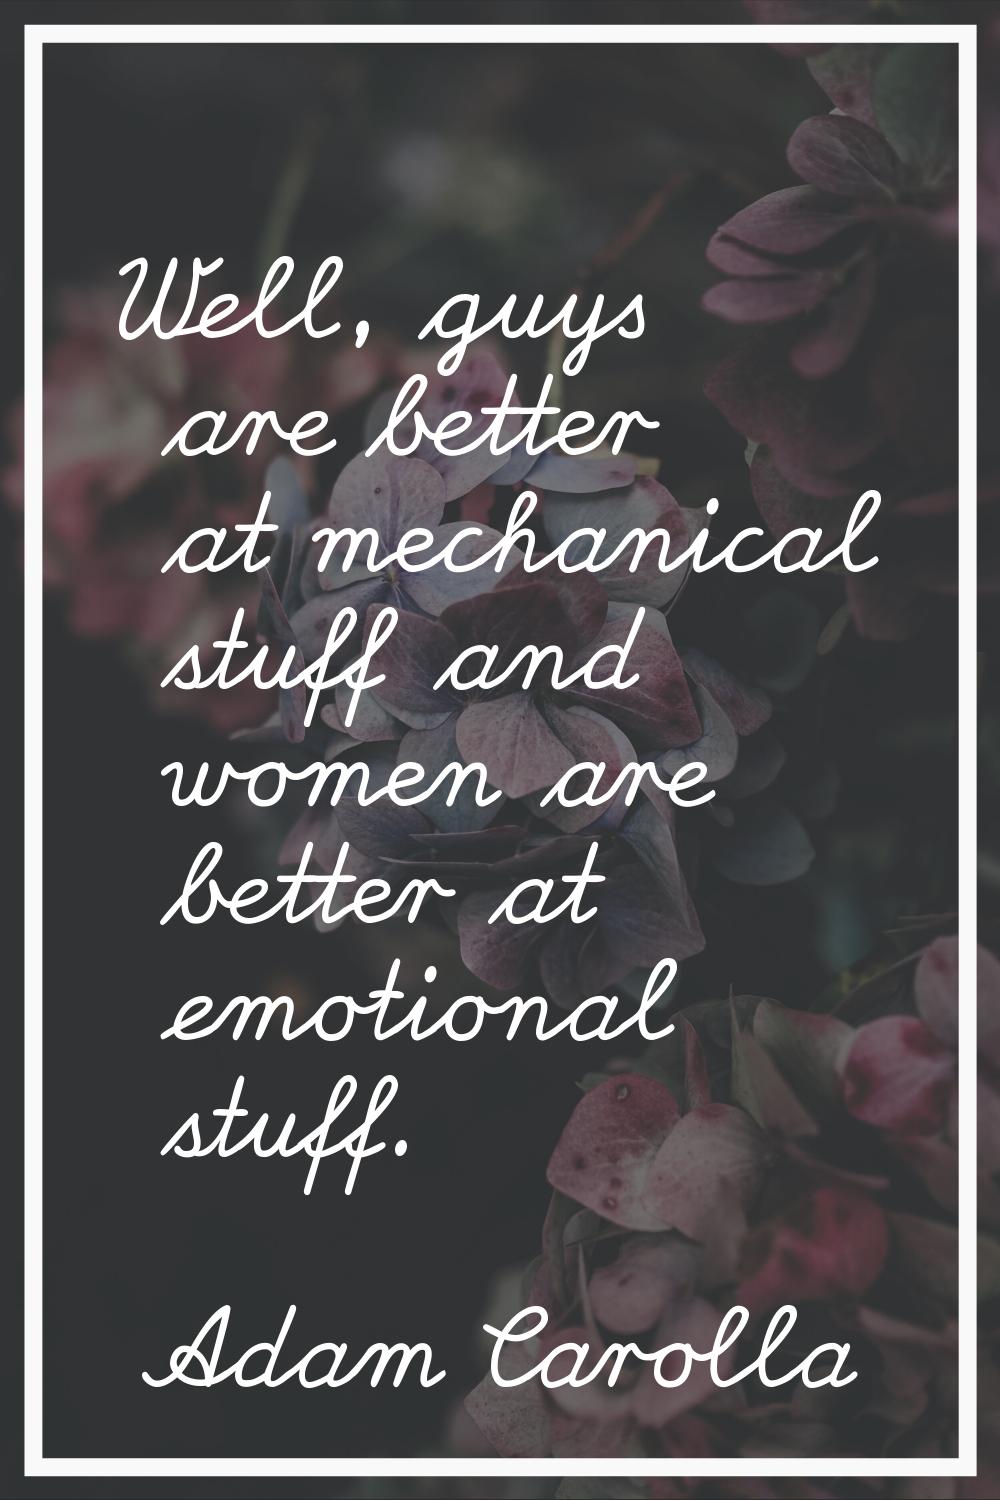 Well, guys are better at mechanical stuff and women are better at emotional stuff.